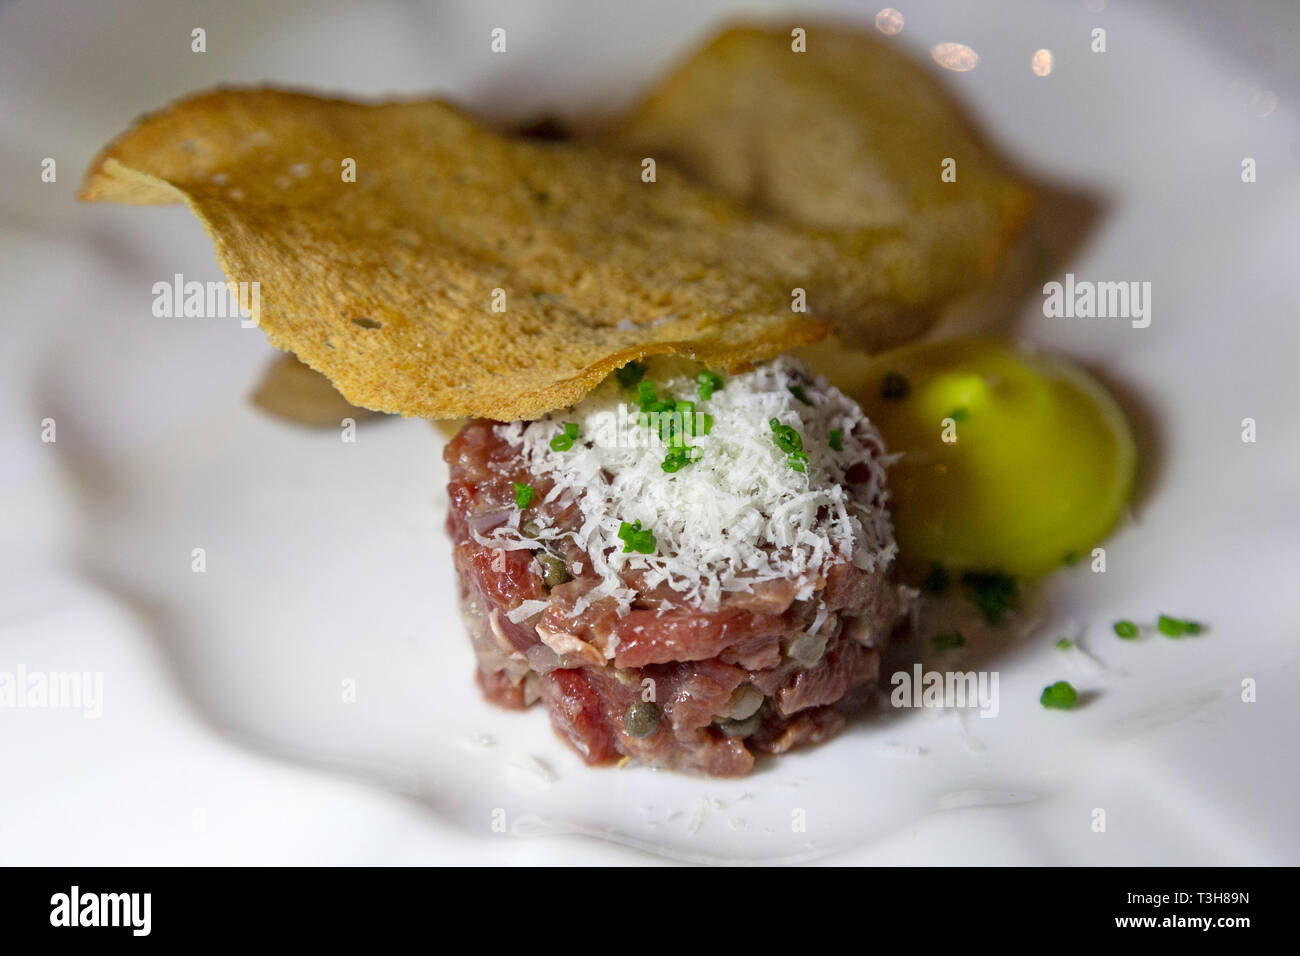 Steak tartare served with a thin slice of crisp bread. The raw meat is topped with grated cheese. Stock Photo